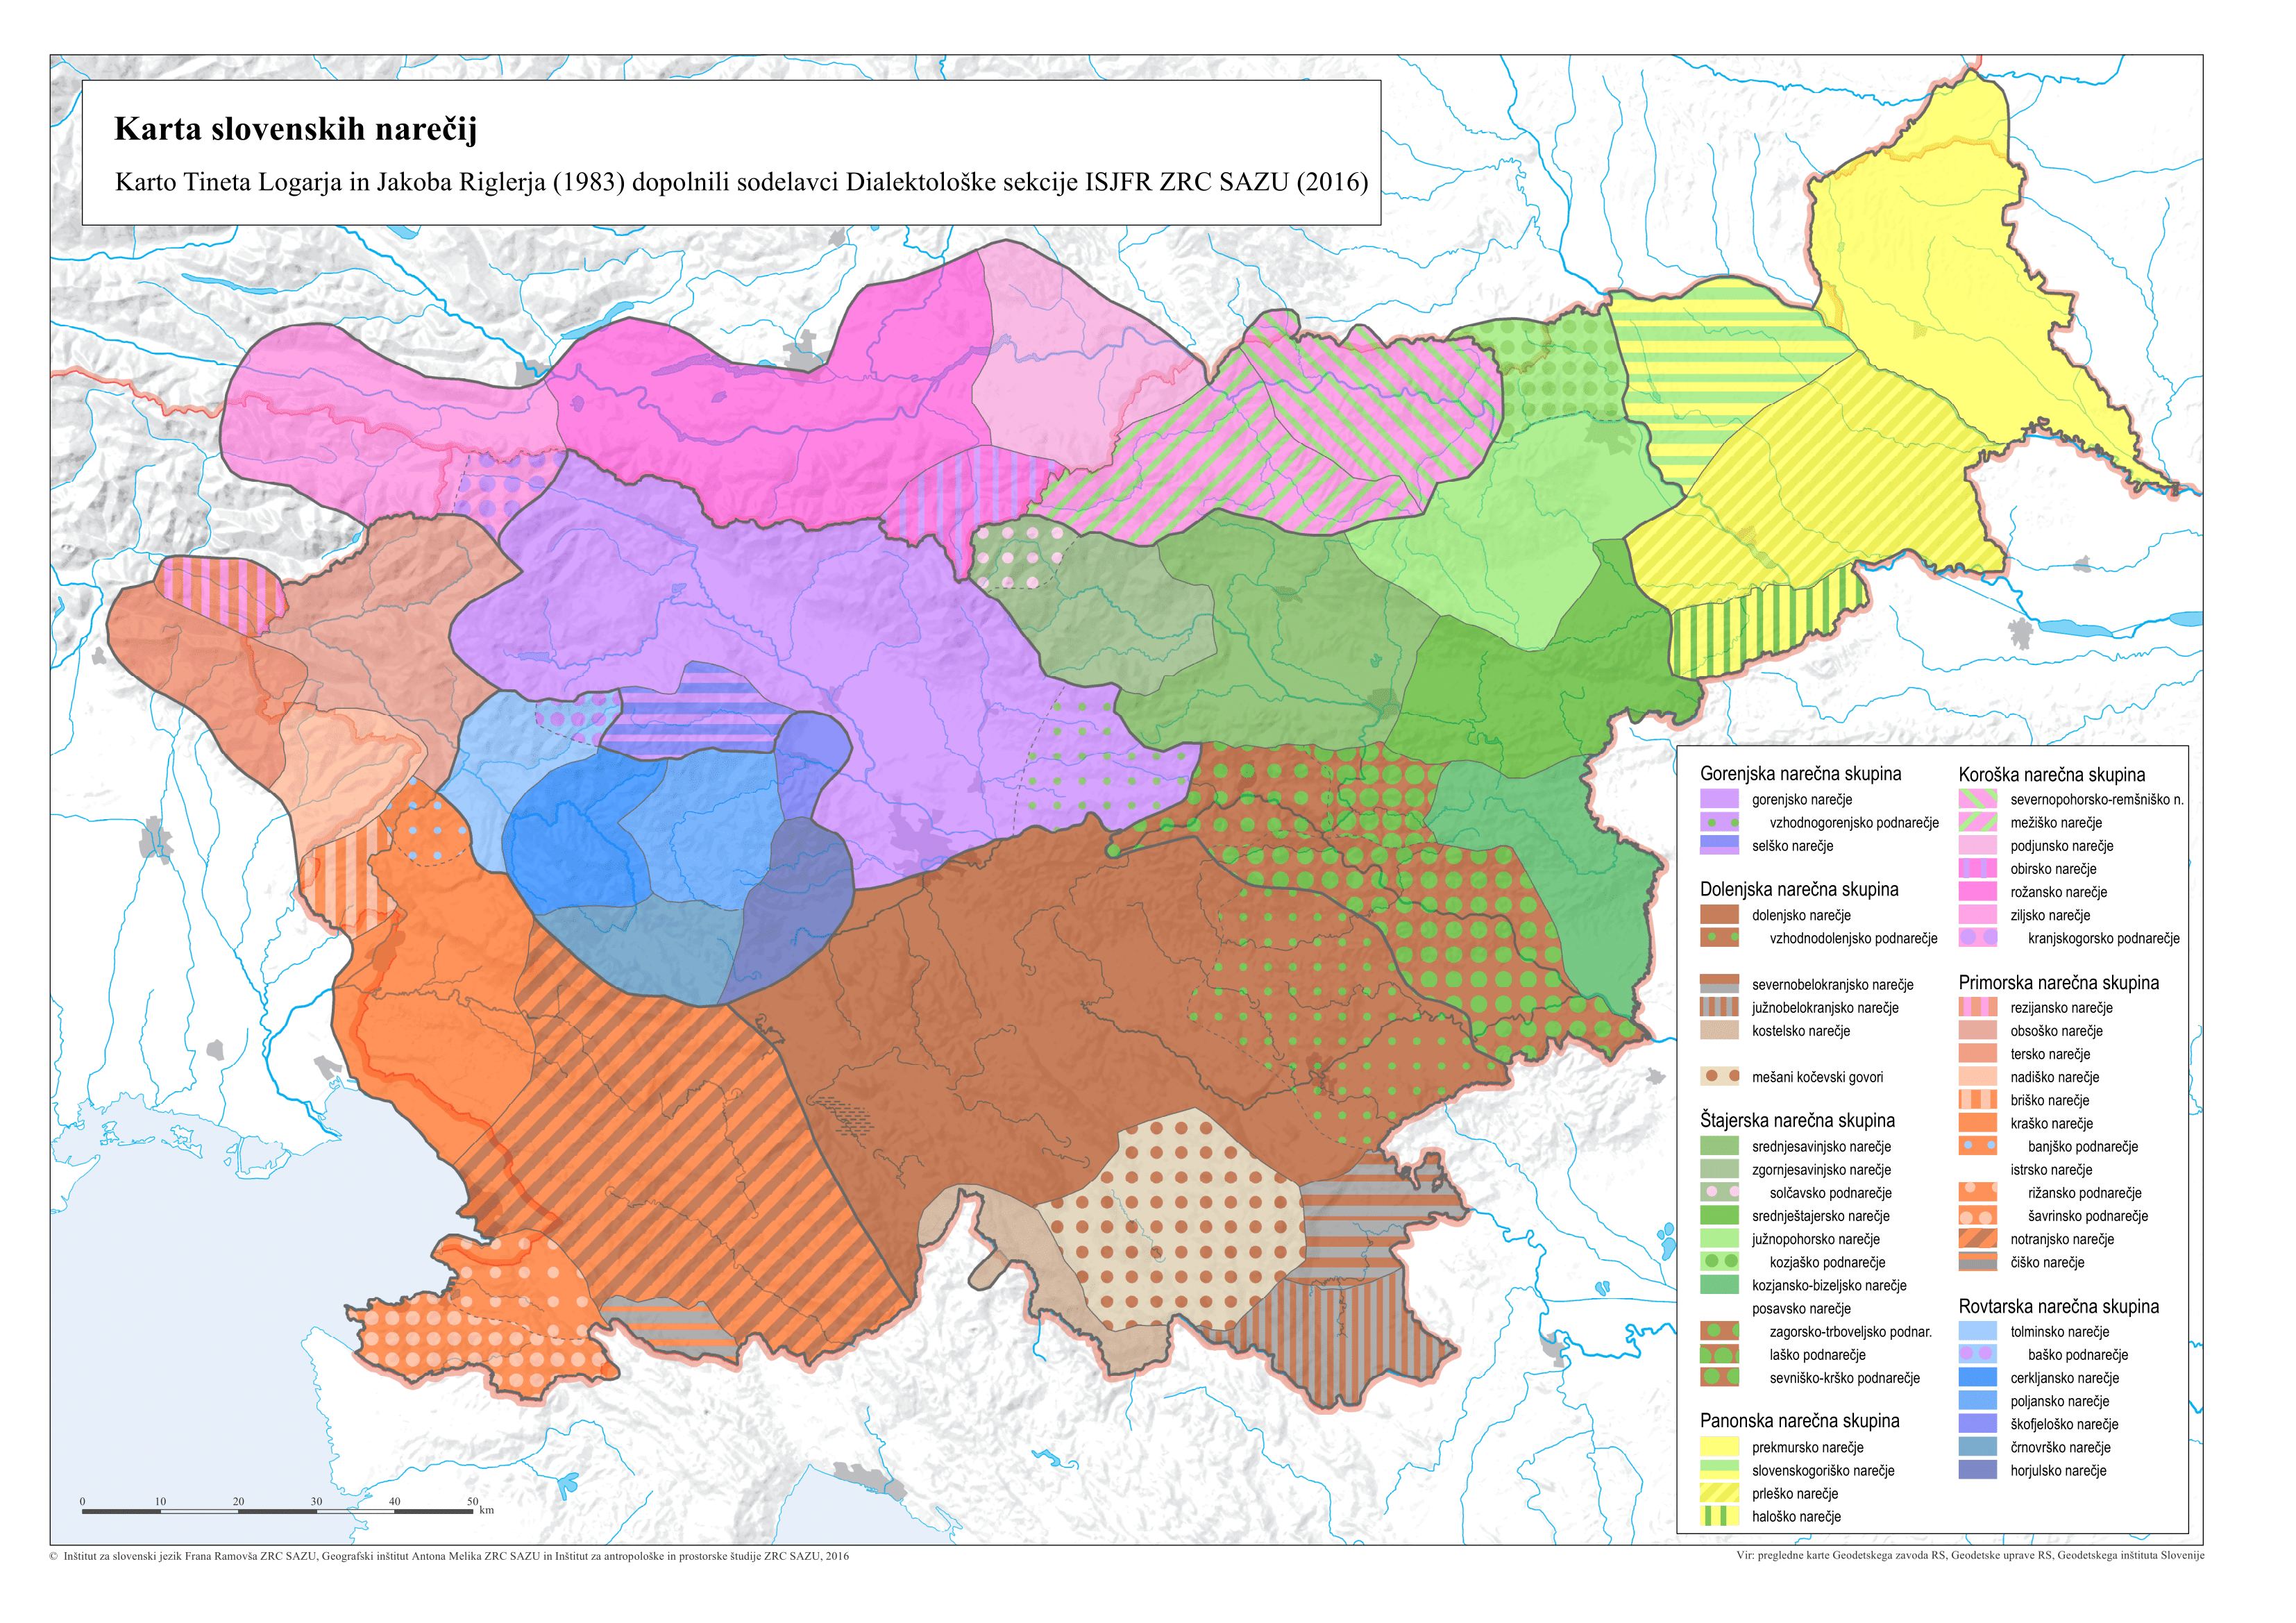 Picture_1_SlovenianDialects_600dpi_RGB-1.png